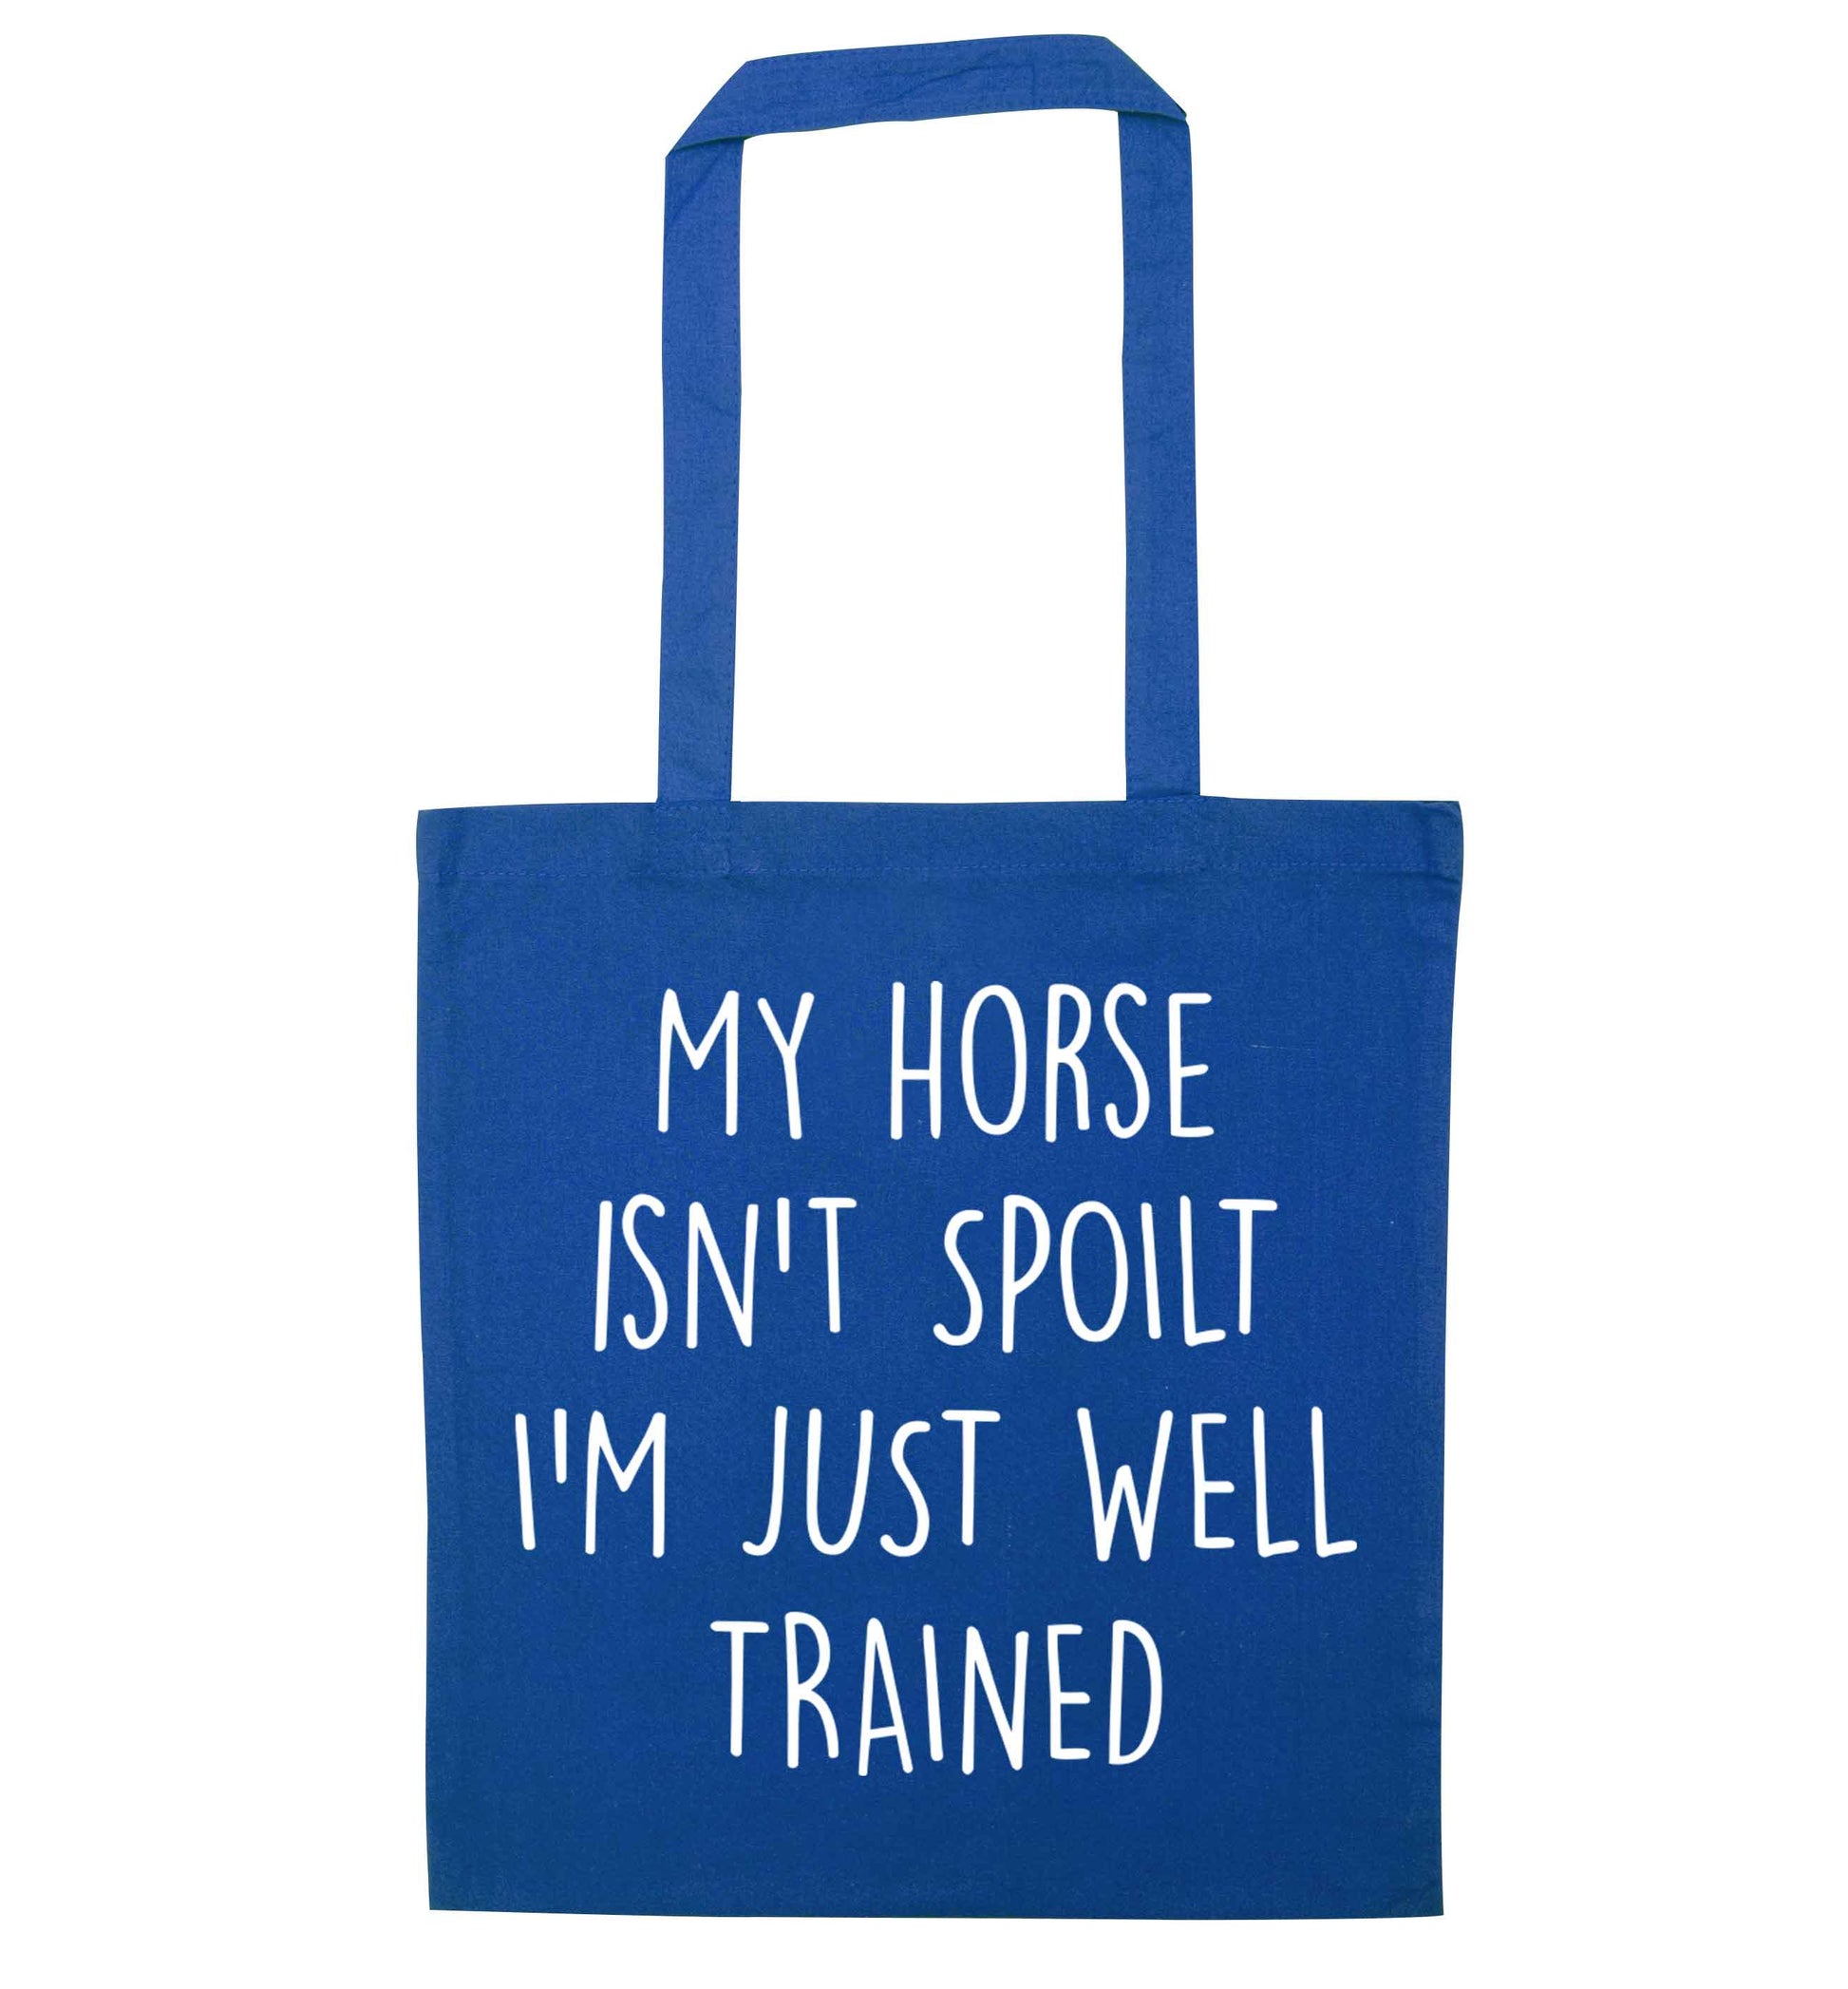 My horse isn't spoilt I'm just well trained blue tote bag